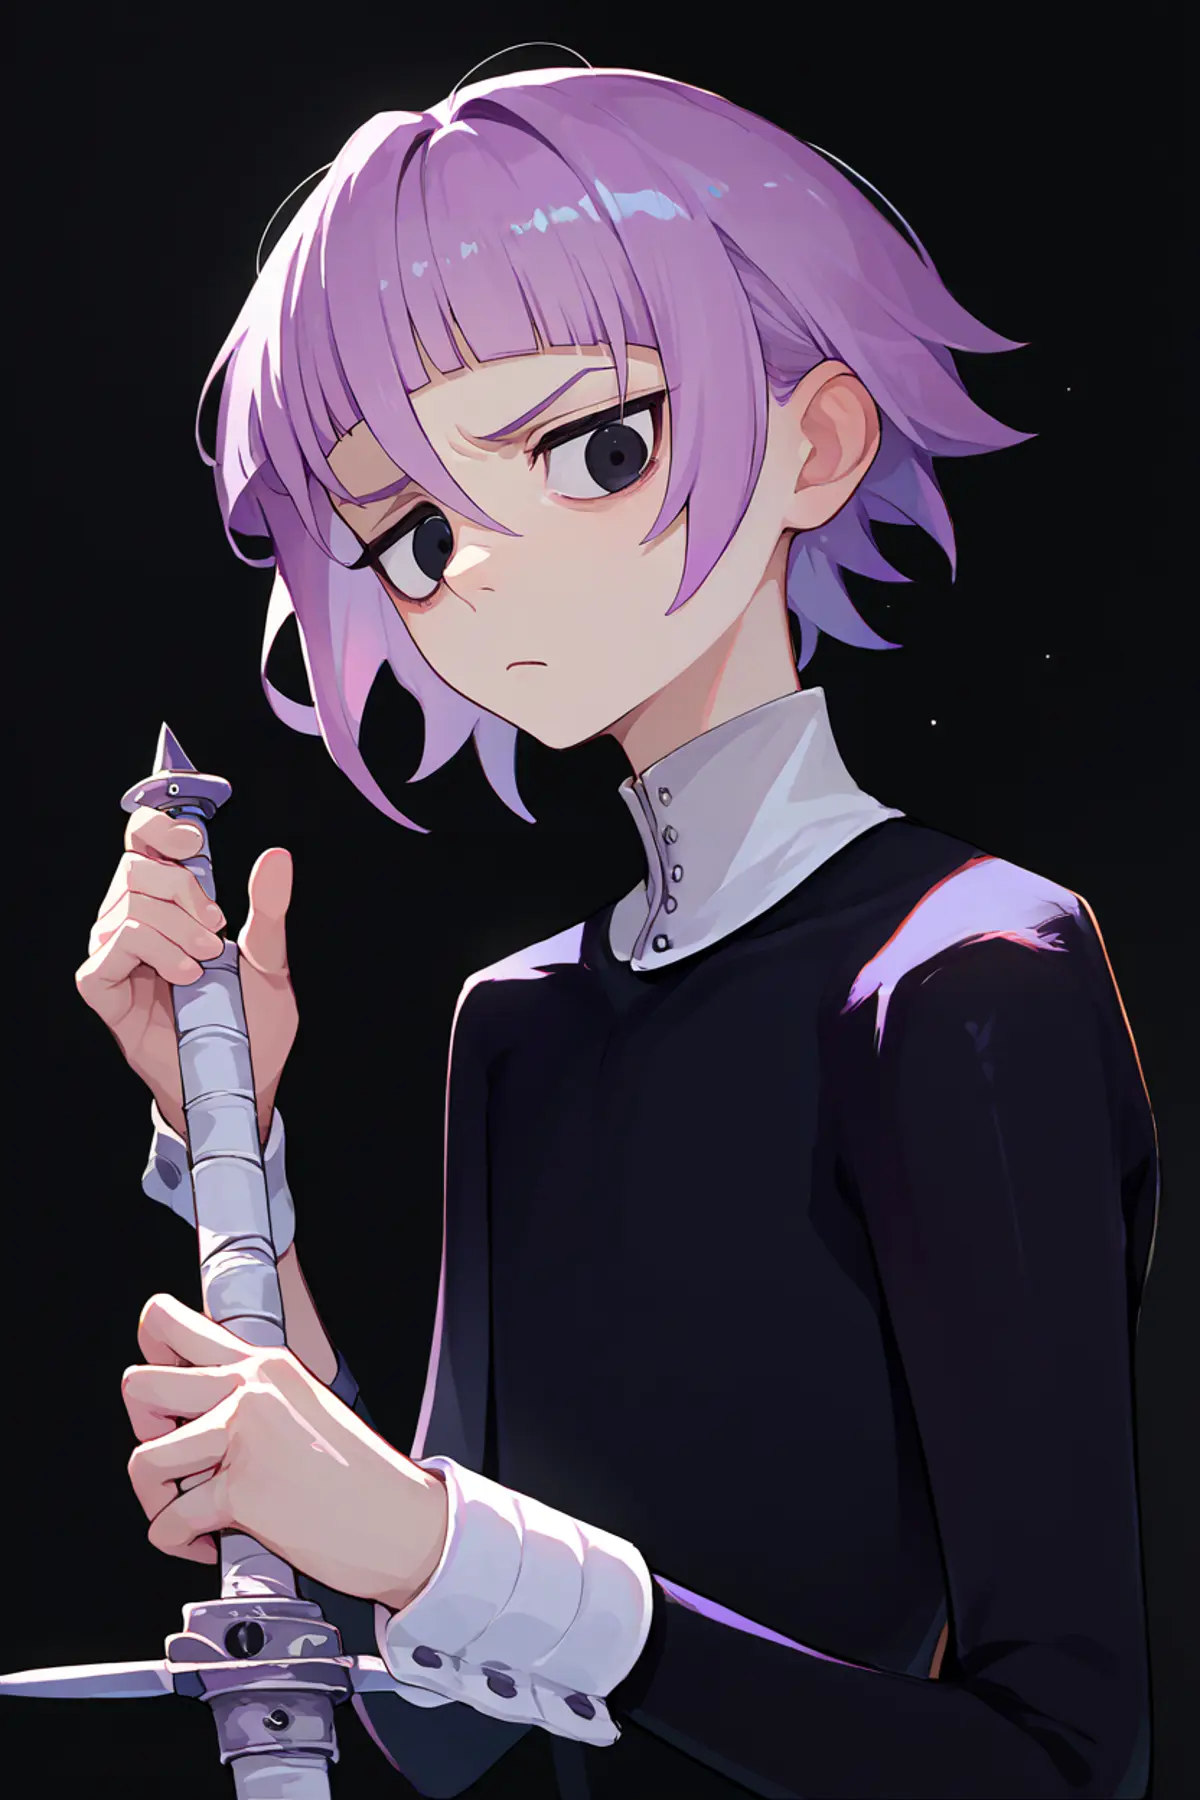 A character with short purple hair and black eyes holding the hilt of a sword with both hands. They are wearing a dark-colored outfit with a high collar and buttons. 